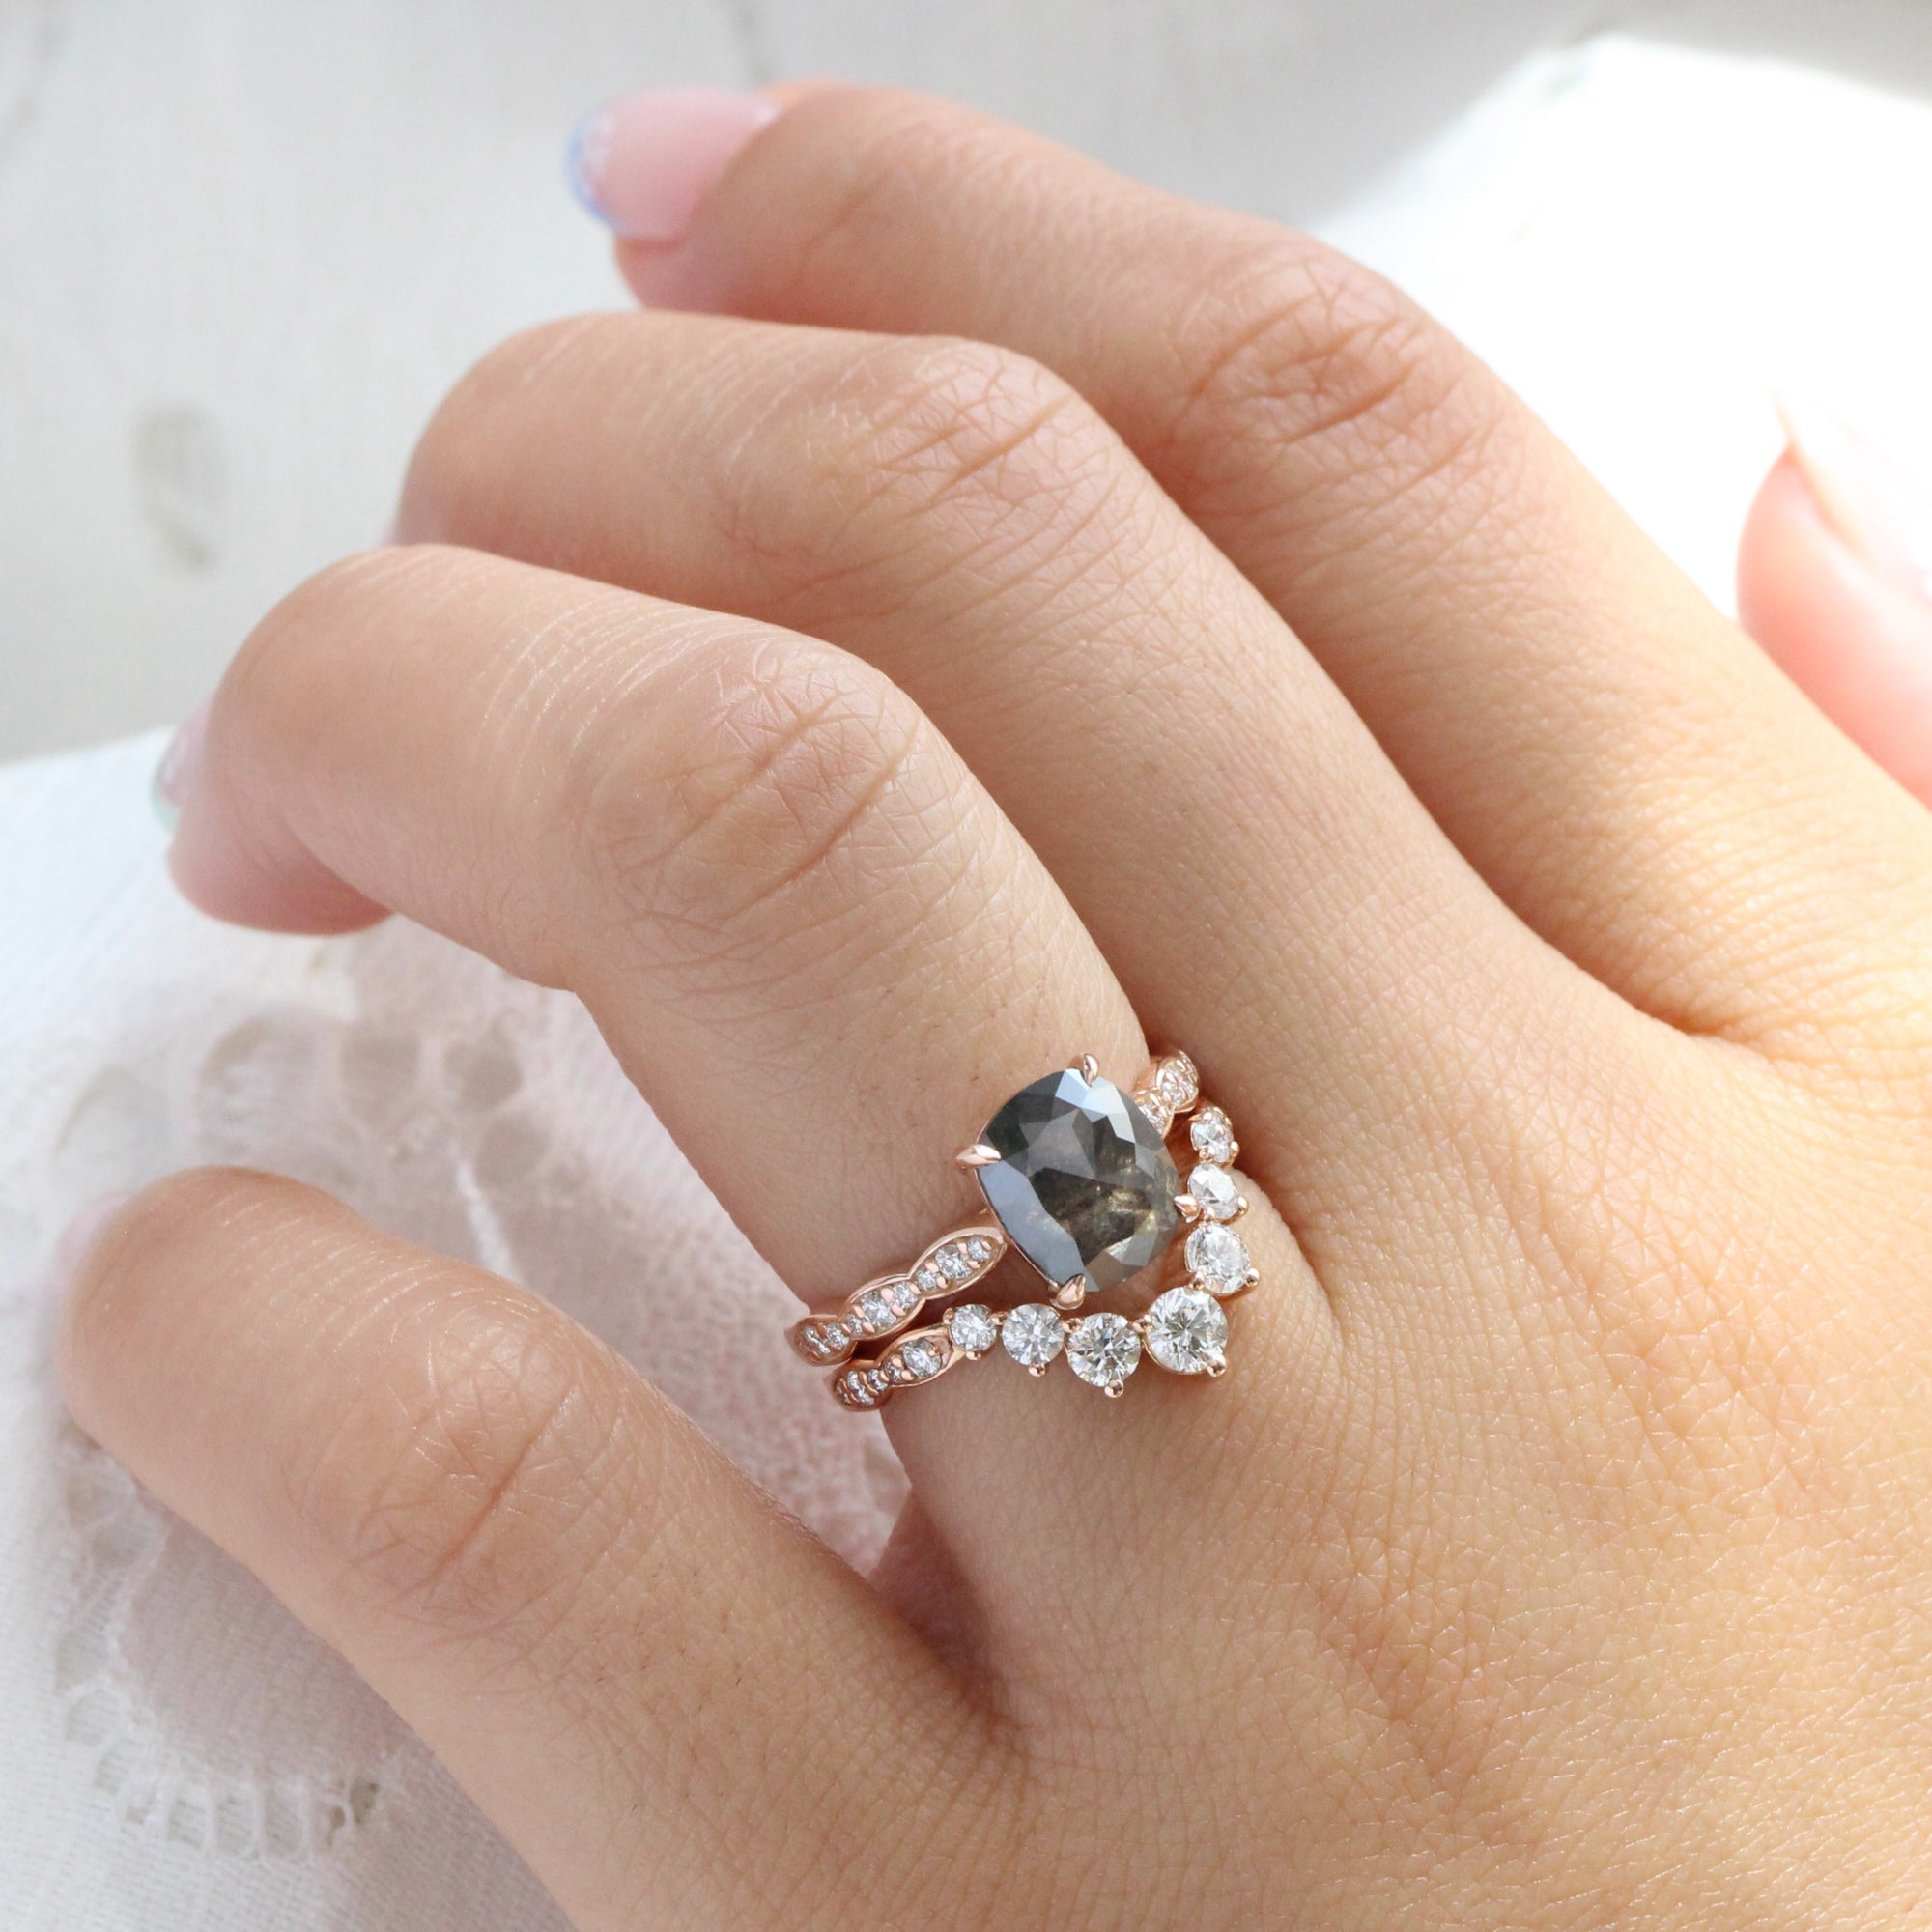 Rose cut cushion salt and pepper diamond ring rose gold solitaire grey diamond scalloped band la more design jewelry